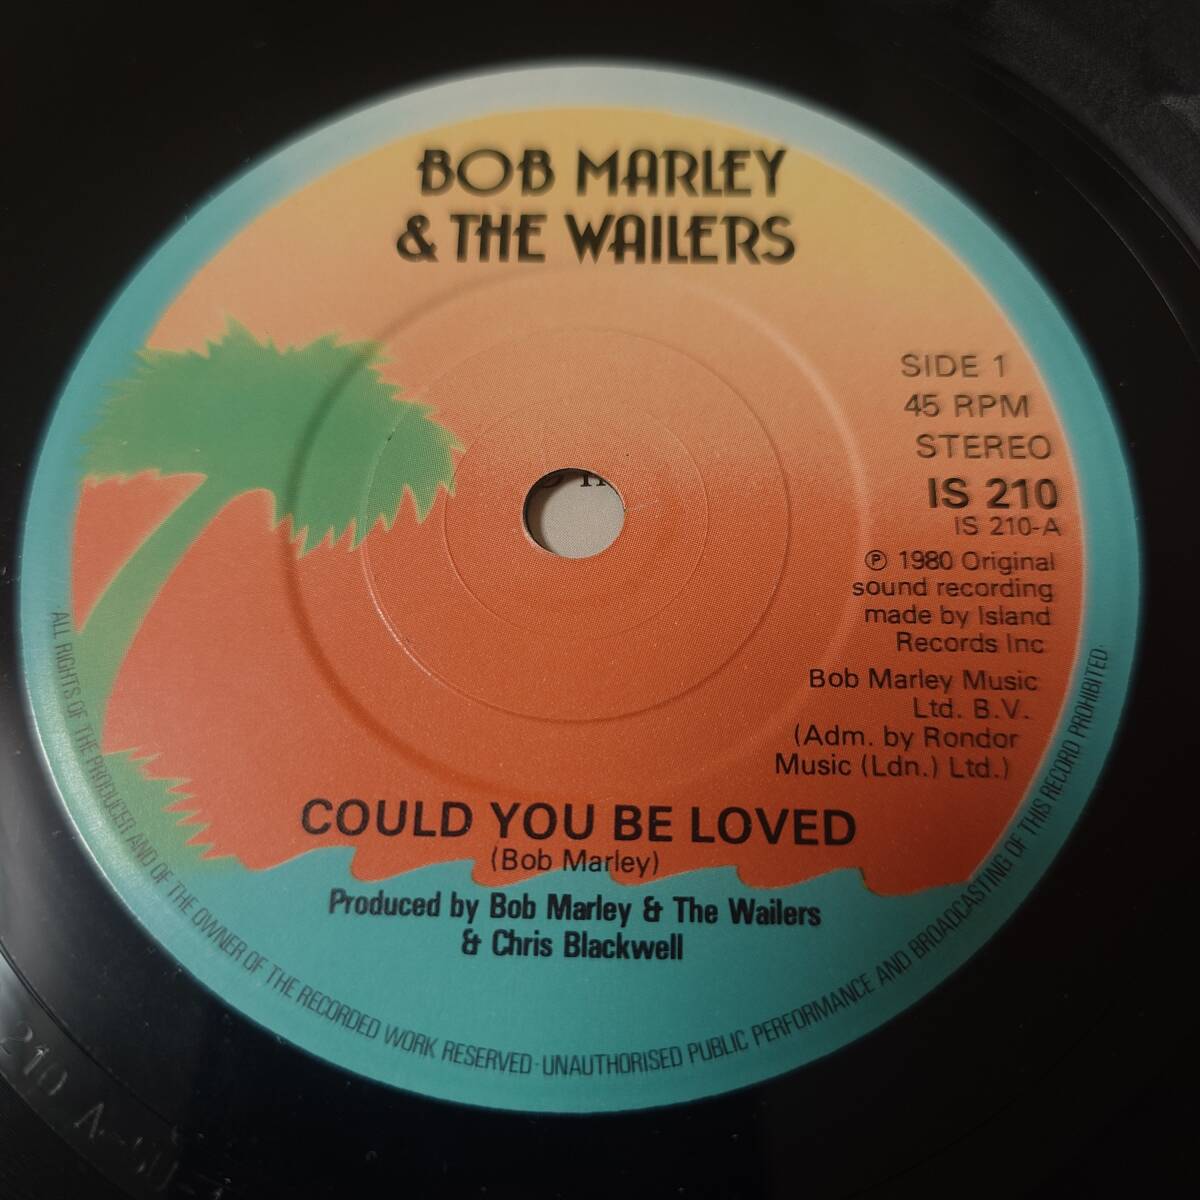 Bob Marley & The Wailers - No Woman No Cry (Remix) / Could You Be Loved // Island Records 7inch / Roots / AA0526 の画像3